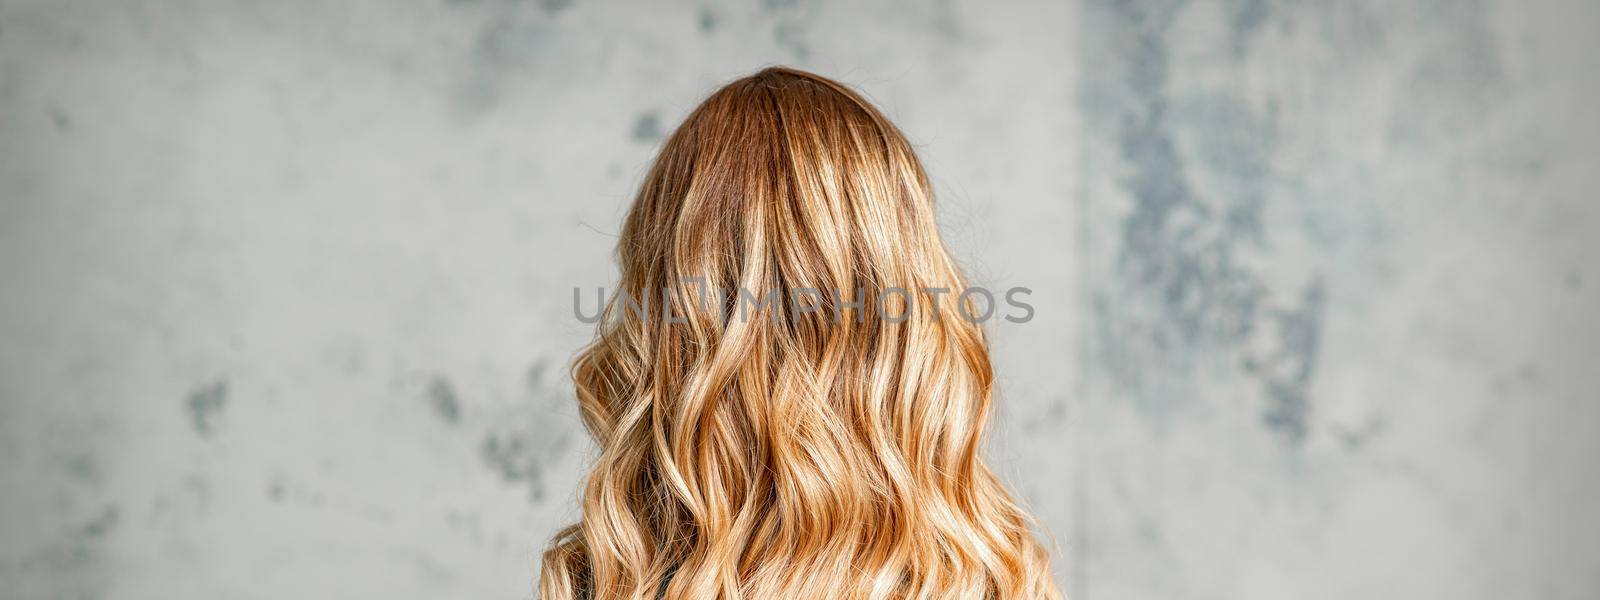 Rear View of a woman with long brown hair against a gray background. by okskukuruza